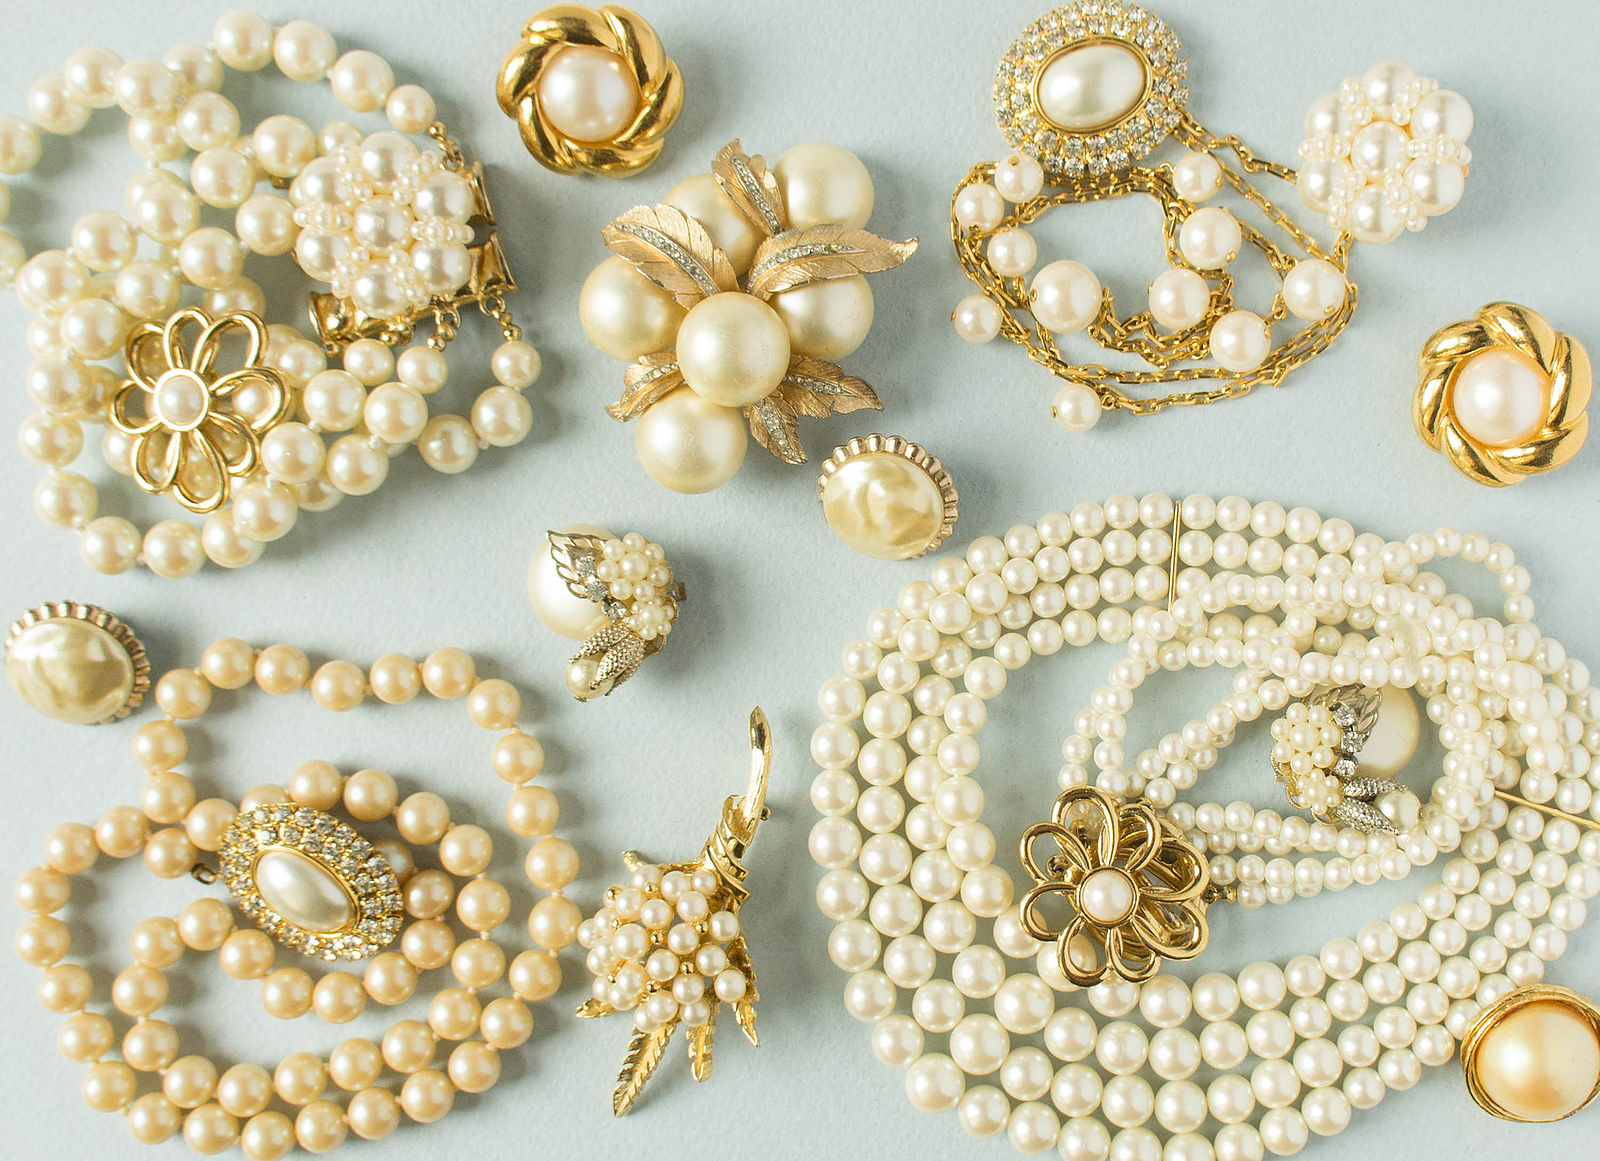 5 Steps to Shipping Antique Jewelry & Accessories Internationally